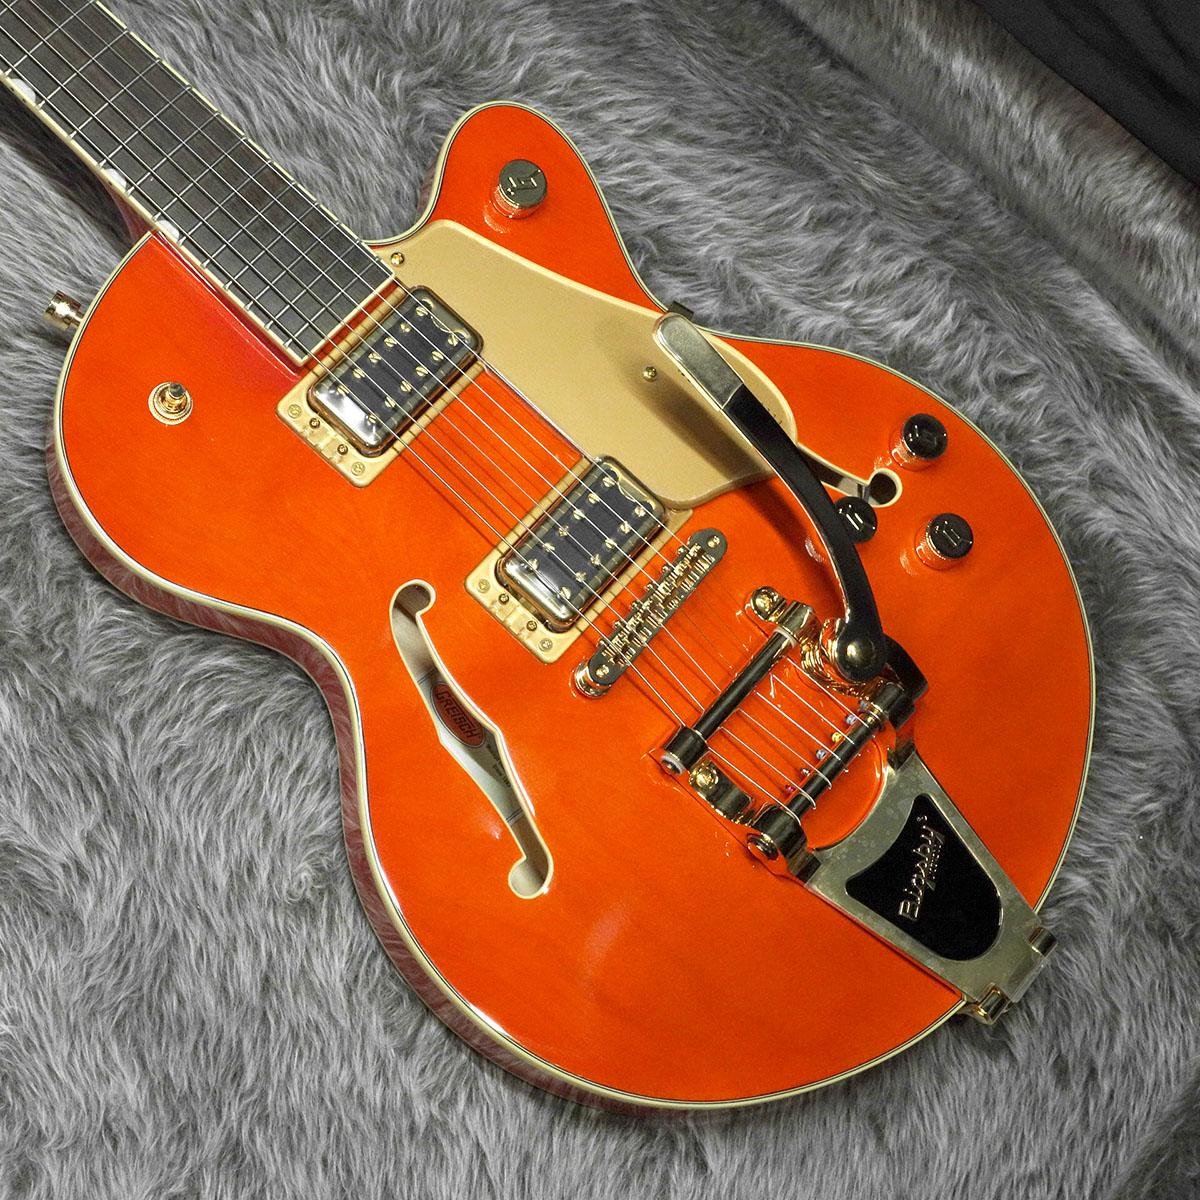 G5655TG Electromatic Center Block Jr. Single-Cut with Bigsby LRL Orange  Stain